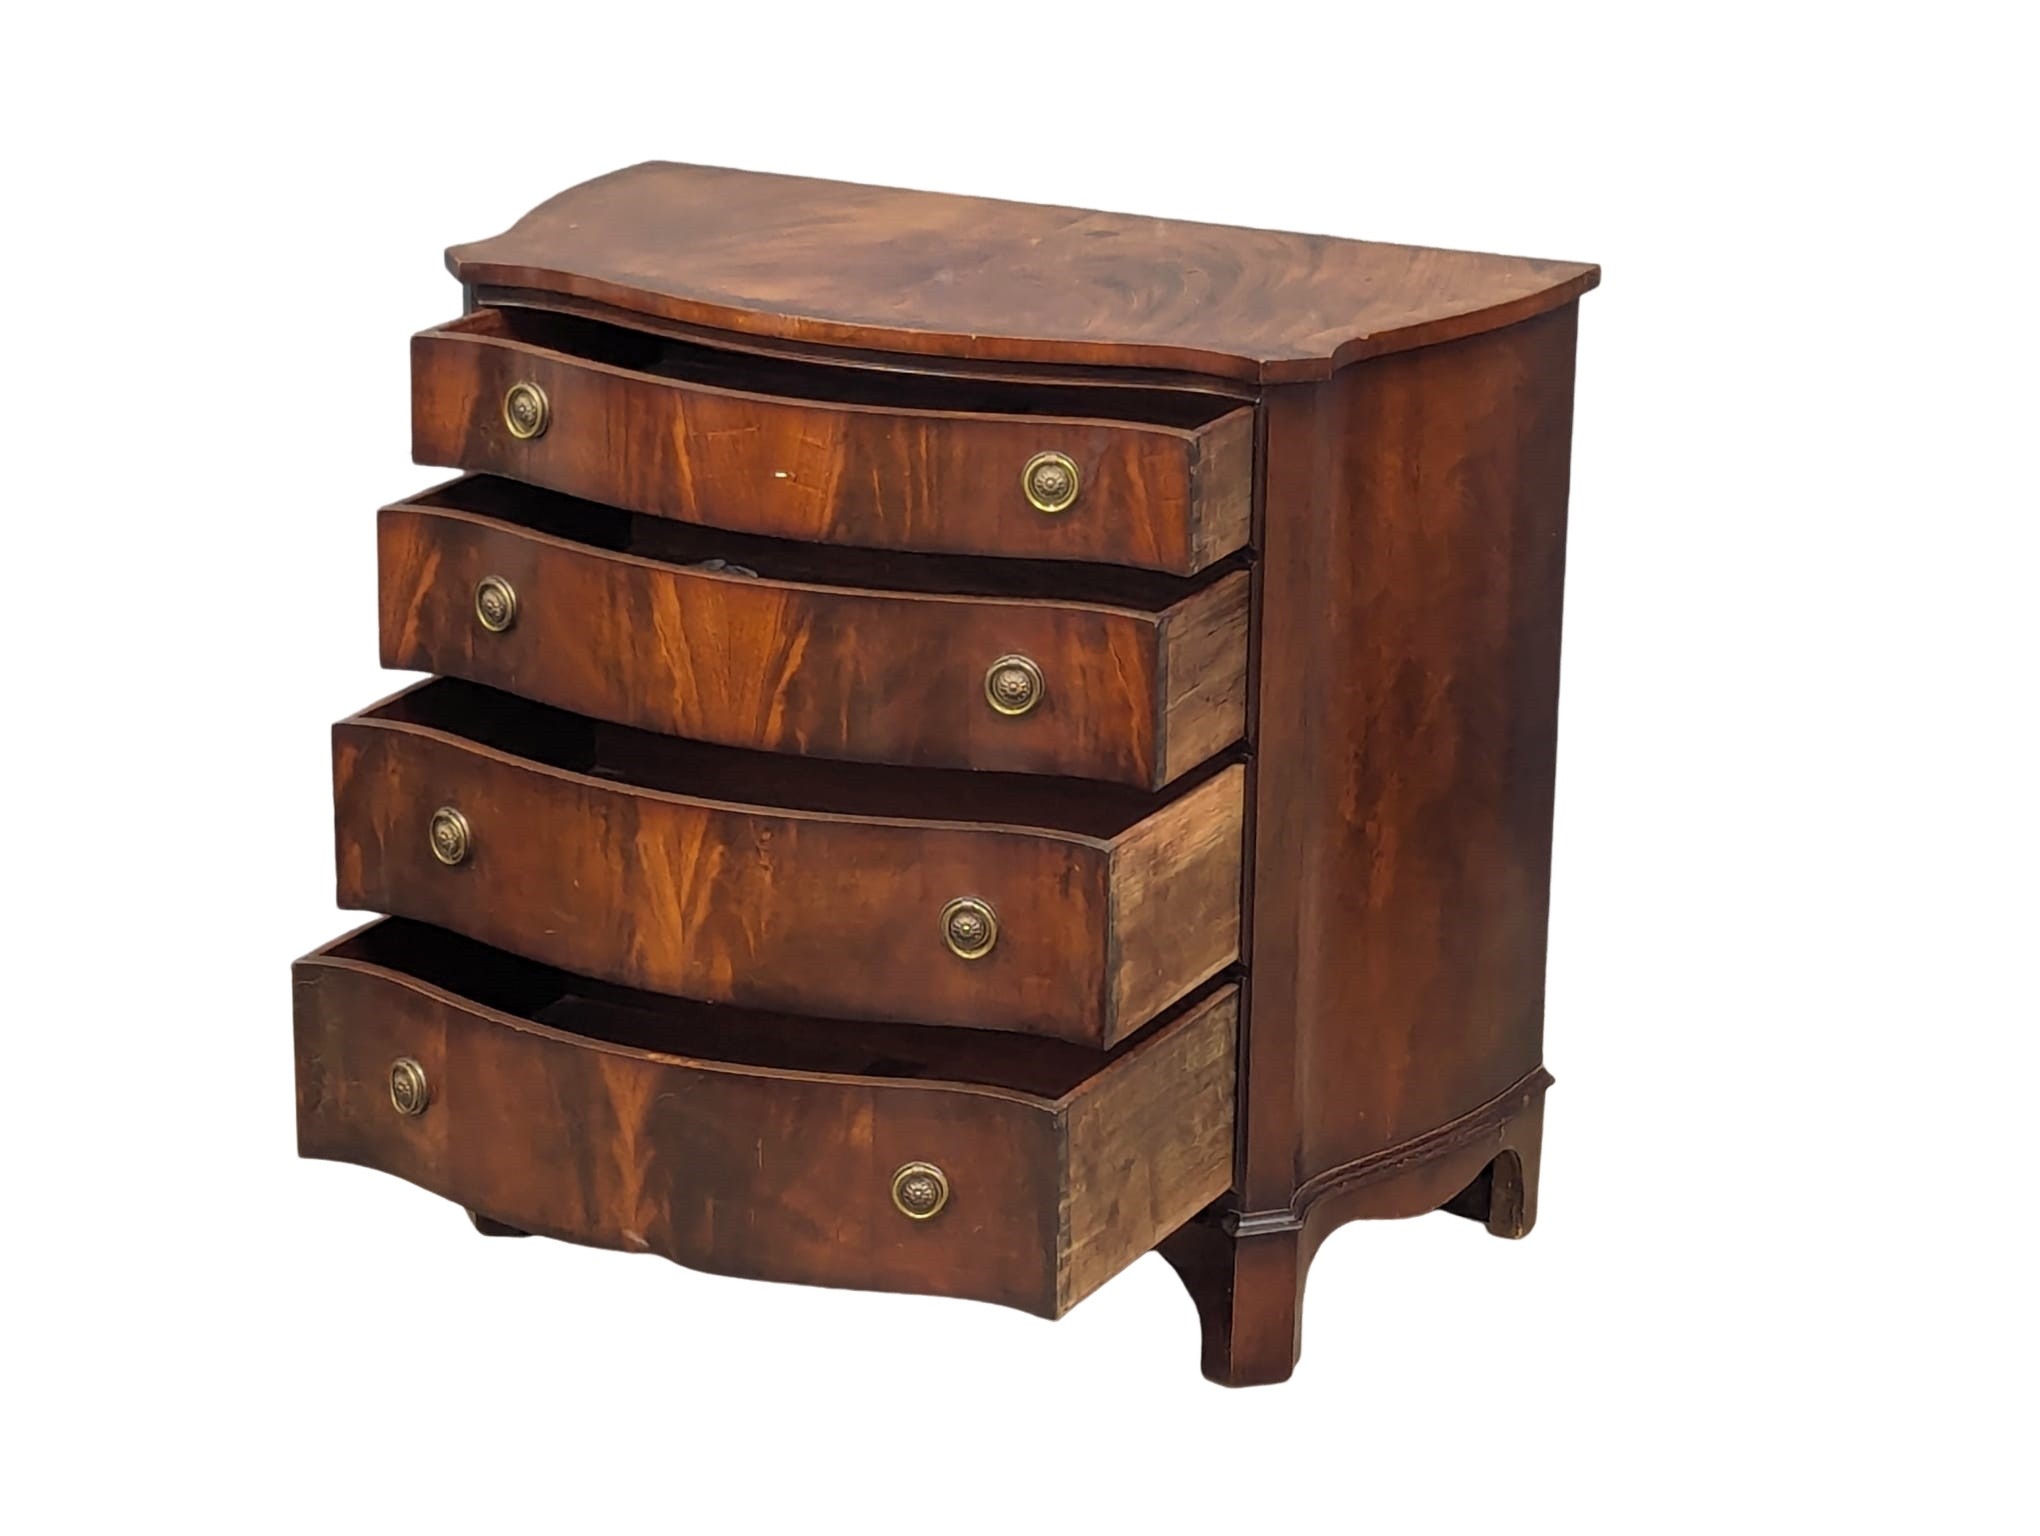 A George III style mahogany Serpentine front chest of drawers. 89x51x83.5cm - Image 5 of 7